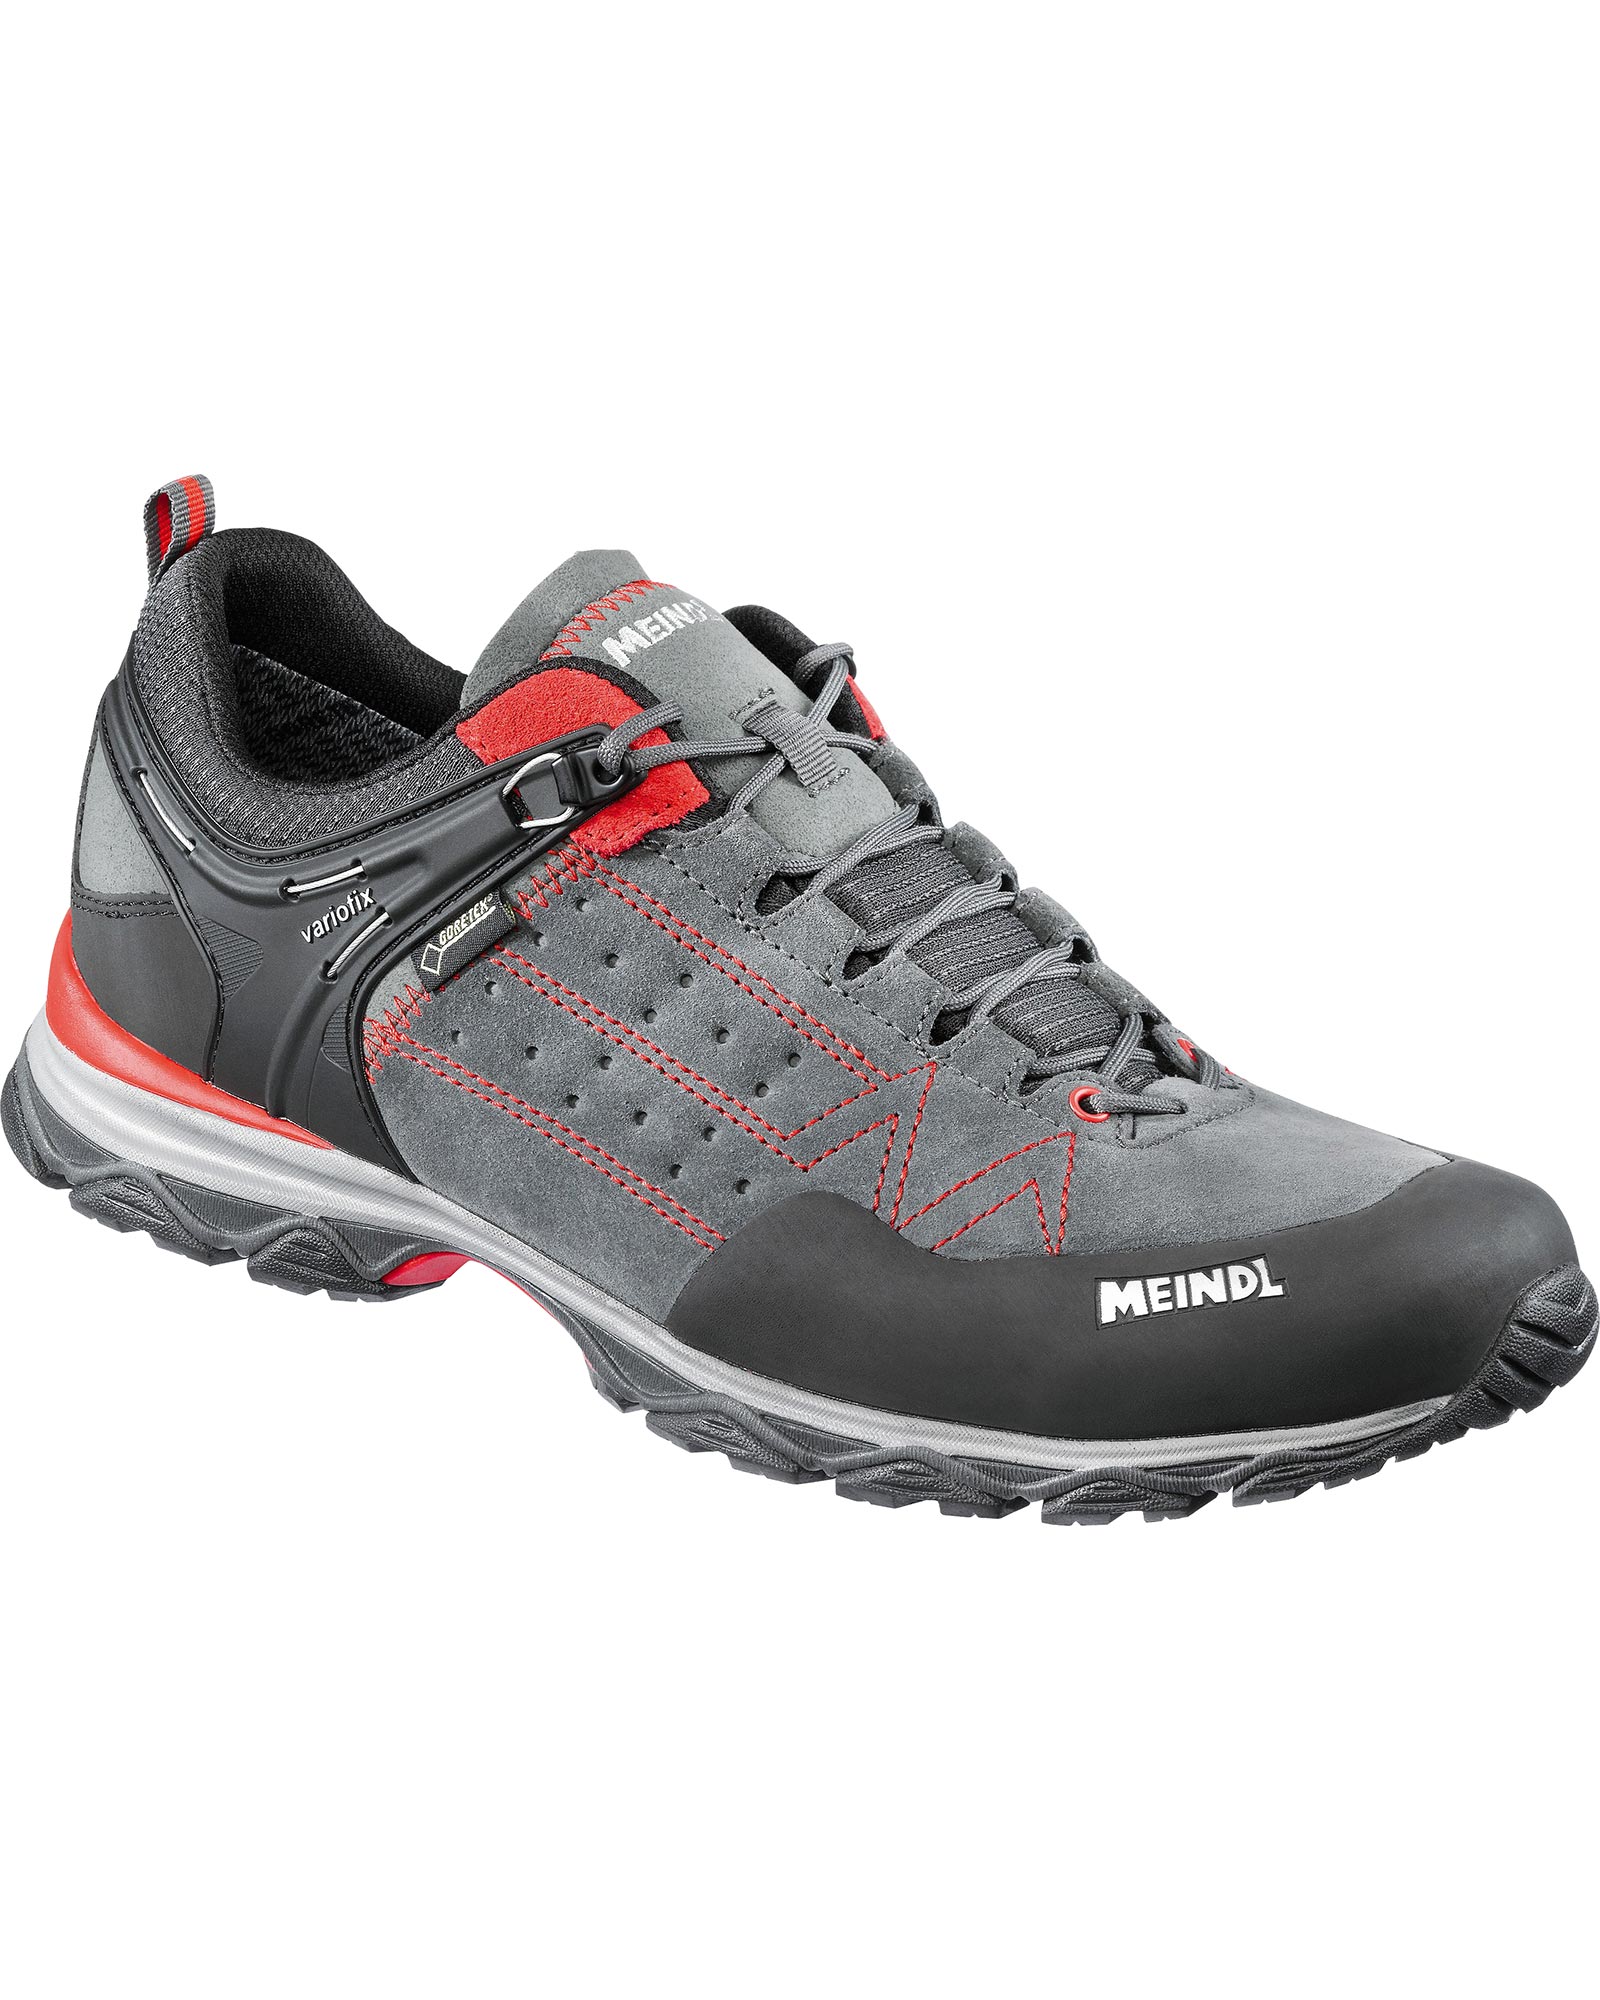 Meindl Ontario GORE TEX Men’s Shoes - Red/Anthracite UK 12